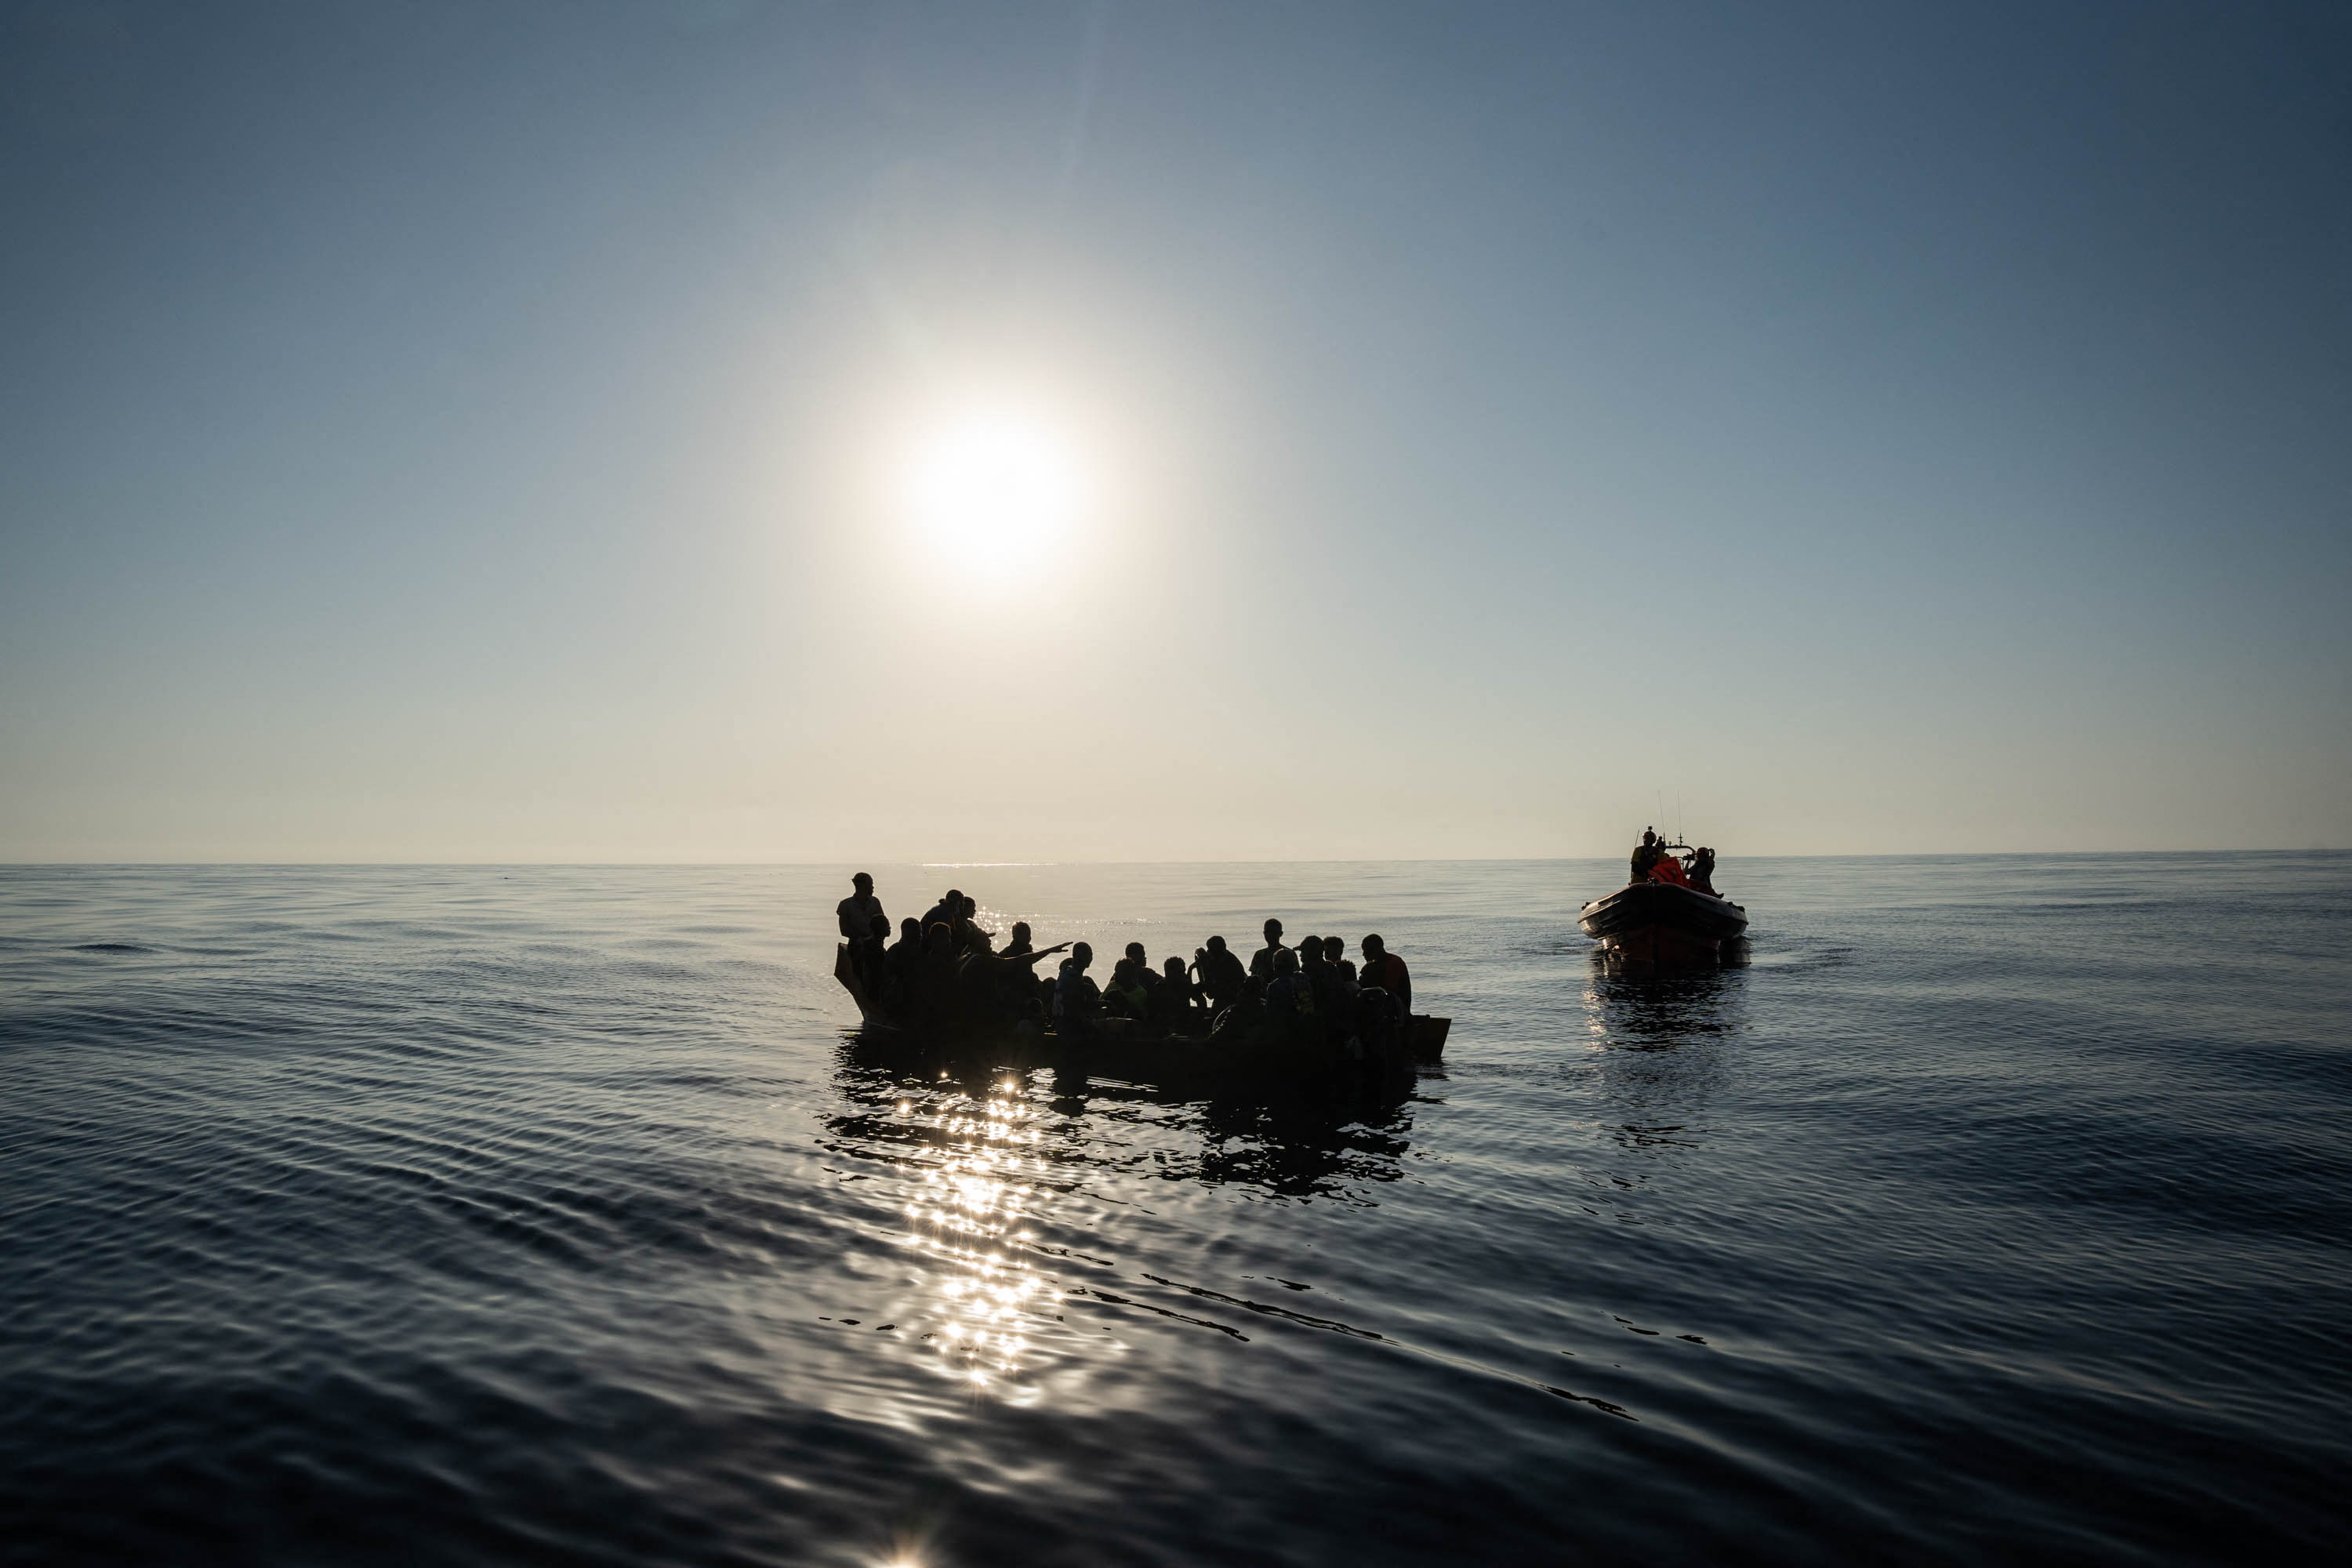 small, overcrowded open-air boats containing migrants at sea.